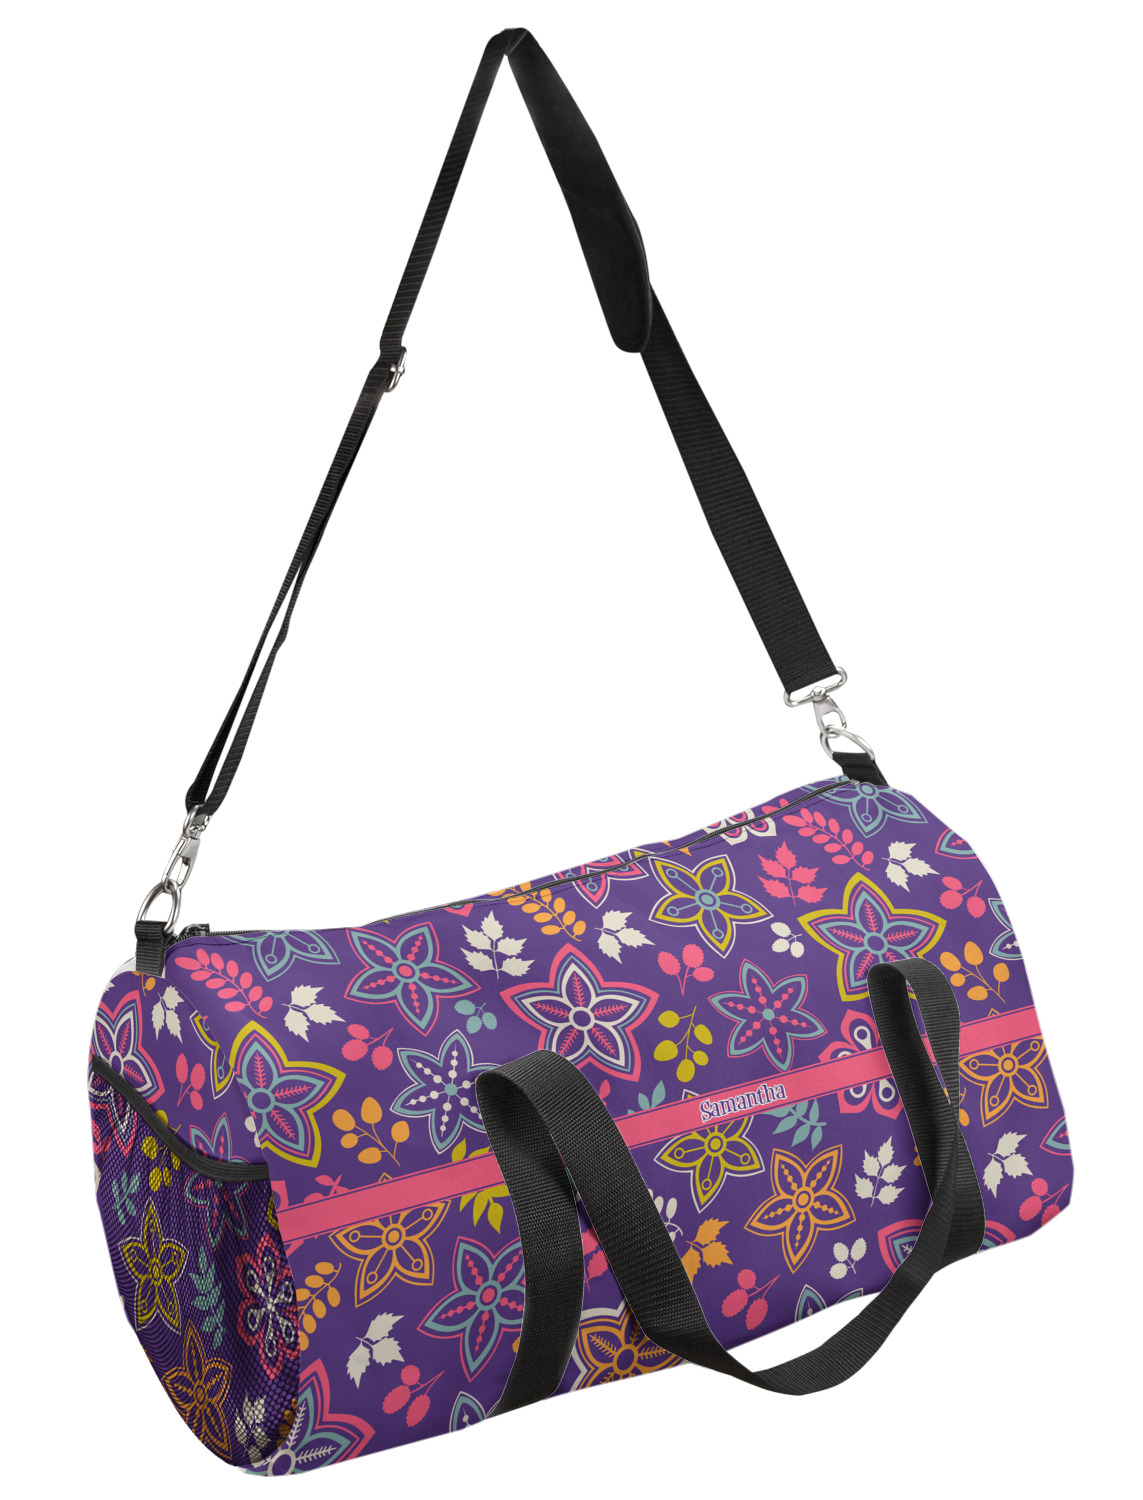 Simple Floral Duffel Bag - Large (Personalized) - YouCustomizeIt